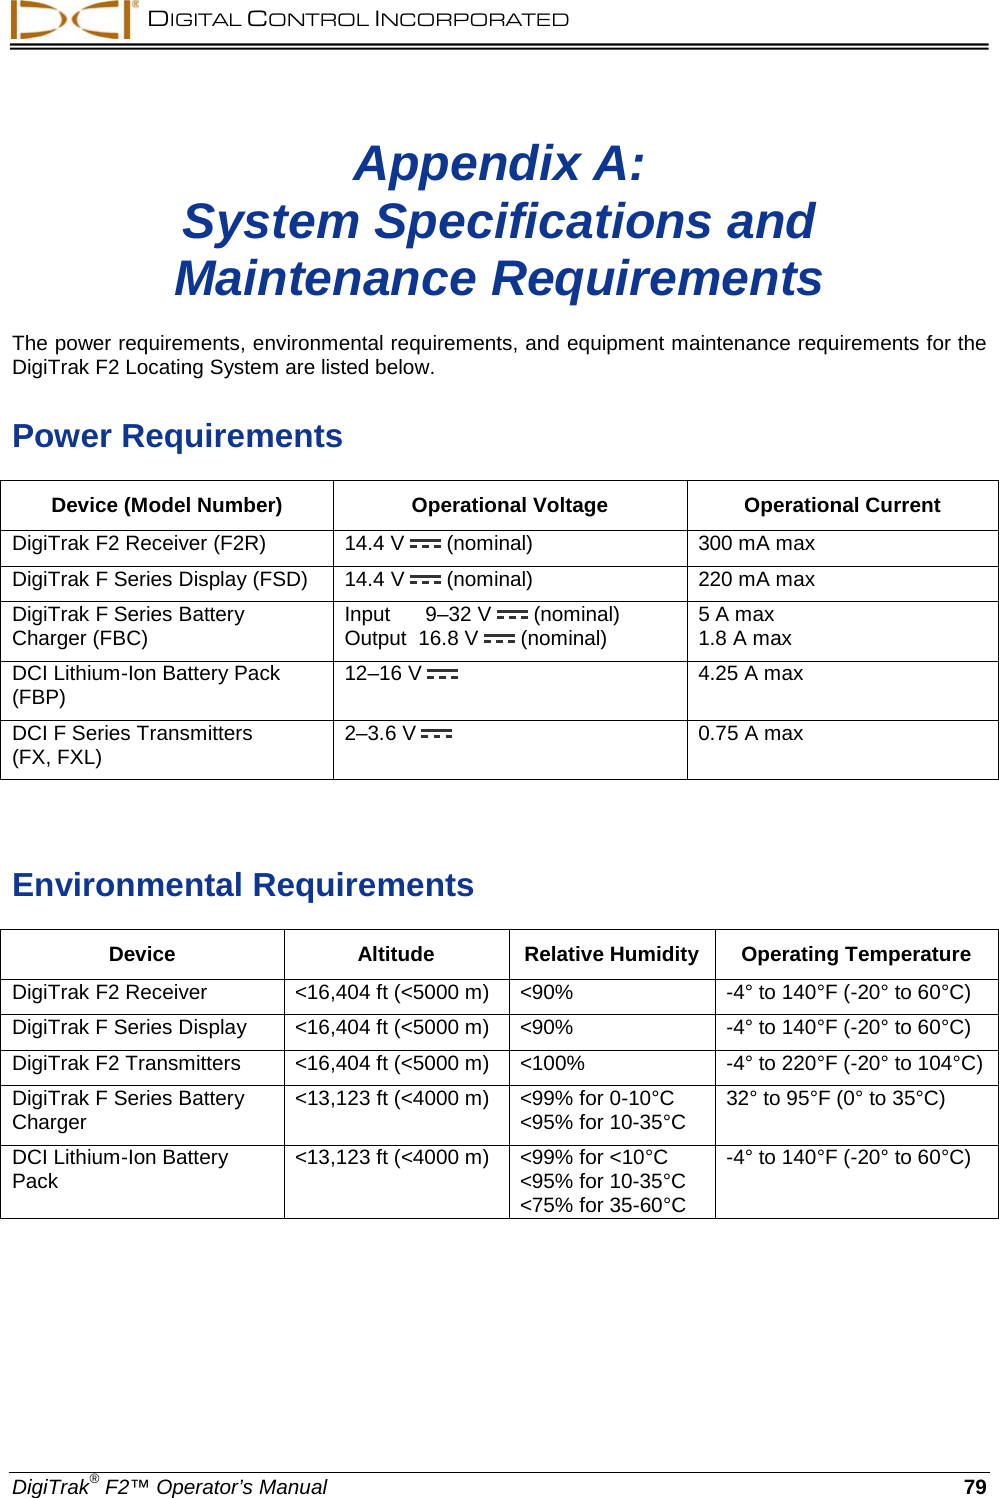  DIGITAL CONTROL INCORPORATED  DigiTrak® F2™ Operator’s Manual 79 Appendix A:  System Specifications and  Maintenance Requirements  The power requirements, environmental requirements, and equipment maintenance requirements for the DigiTrak F2 Locating System are listed below. Power Requirements Device (Model Number) Operational Voltage Operational Current DigiTrak F2 Receiver (F2R) 14.4 V  (nominal) 300 mA max DigiTrak F Series Display (FSD) 14.4 V  (nominal) 220 mA max DigiTrak F Series Battery Charger (FBC) Input      9–32 V  (nominal) Output  16.8 V  (nominal) 5 A max 1.8 A max  DCI Lithium-Ion Battery Pack (FBP) 12–16 V  4.25 A max DCI F Series Transmitters  (FX, FXL) 2–3.6 V  0.75 A max   Environmental Requirements Device Altitude Relative Humidity Operating Temperature DigiTrak F2 Receiver &lt;16,404 ft (&lt;5000 m) &lt;90% -4° to 140°F (-20° to 60°C) DigiTrak F Series Display &lt;16,404 ft (&lt;5000 m) &lt;90% -4° to 140°F (-20° to 60°C) DigiTrak F2 Transmitters &lt;16,404 ft (&lt;5000 m) &lt;100% -4° to 220°F (-20° to 104°C) DigiTrak F Series Battery Charger &lt;13,123 ft (&lt;4000 m) &lt;99% for 0-10°C &lt;95% for 10-35°C 32° to 95°F (0° to 35°C) DCI Lithium-Ion Battery Pack &lt;13,123 ft (&lt;4000 m) &lt;99% for &lt;10°C &lt;95% for 10-35°C &lt;75% for 35-60°C -4° to 140°F (-20° to 60°C)  